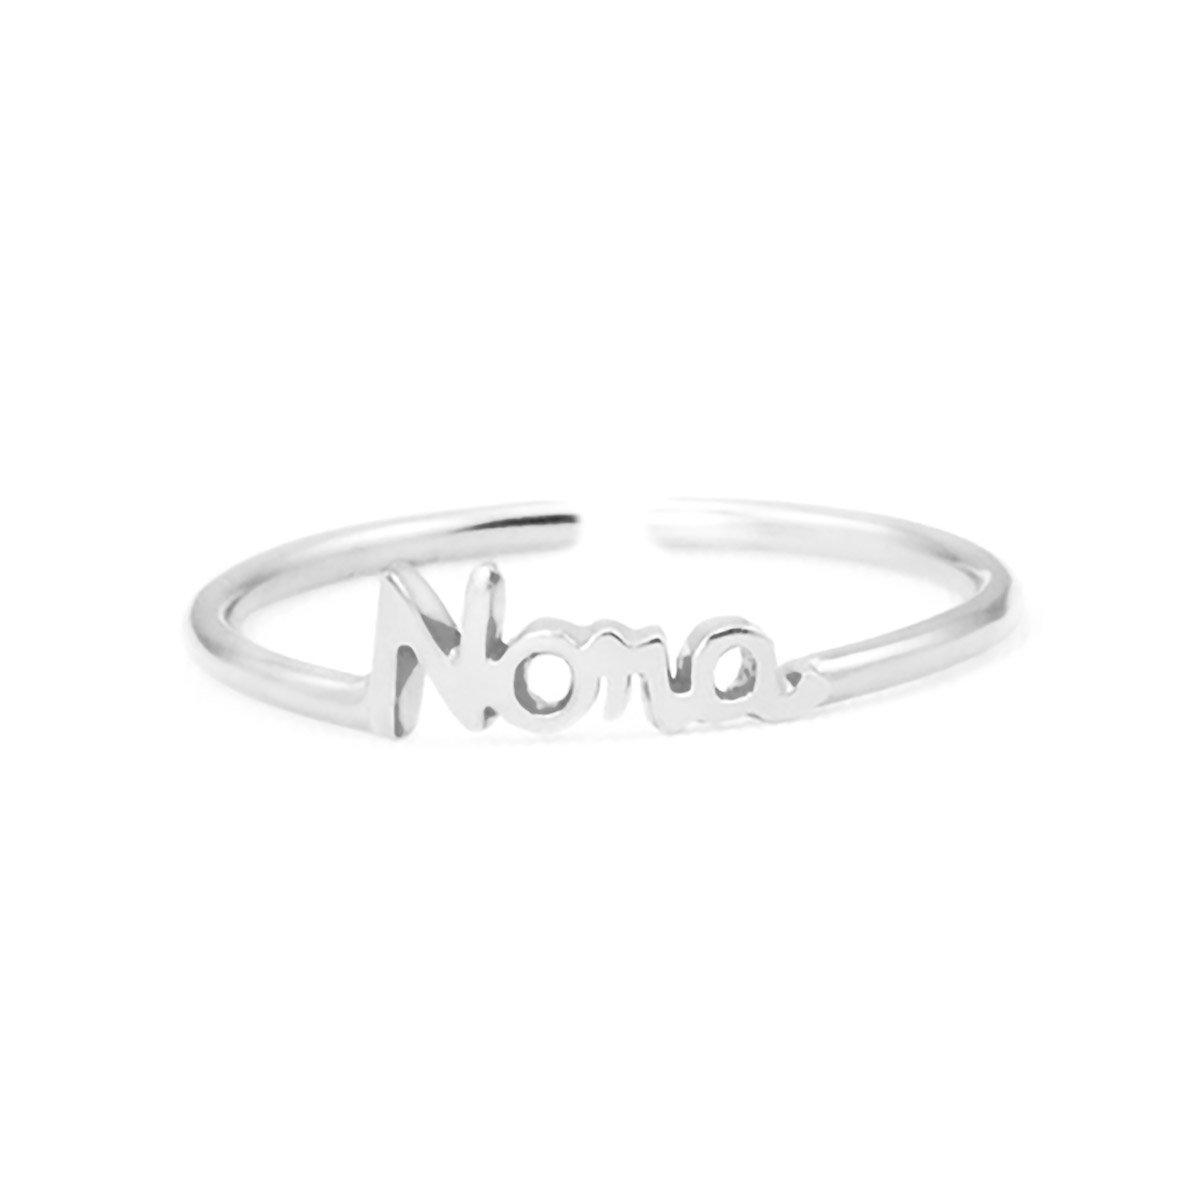 Customized Silver Ring With Name | Silver rings, Rings, Embossed rings